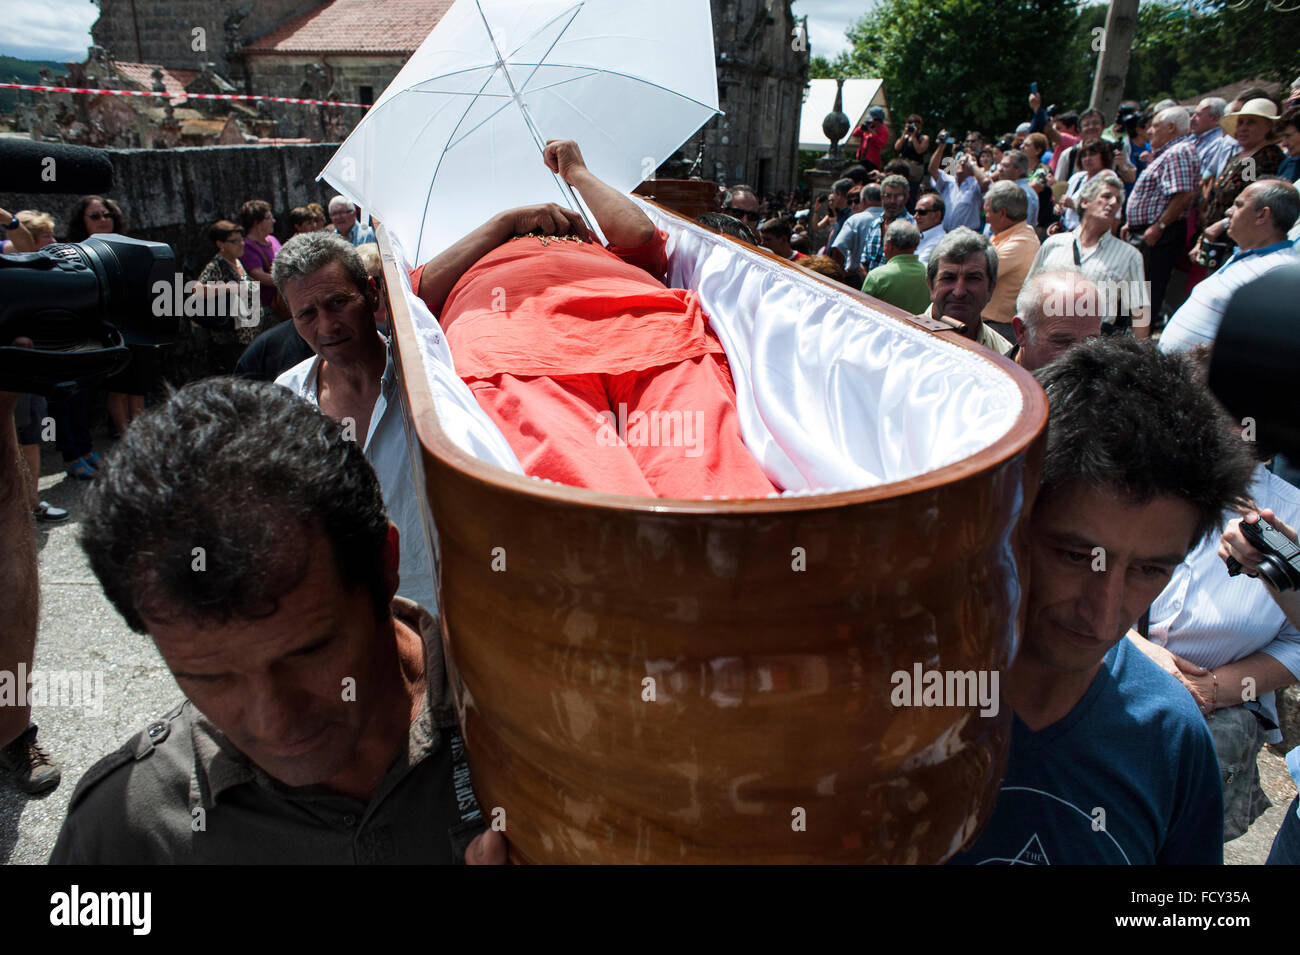 One offered is protected from the sun with an umbrella during the procession of coffins in Santa Marta de Ribarteme (Pontevedra) Stock Photo